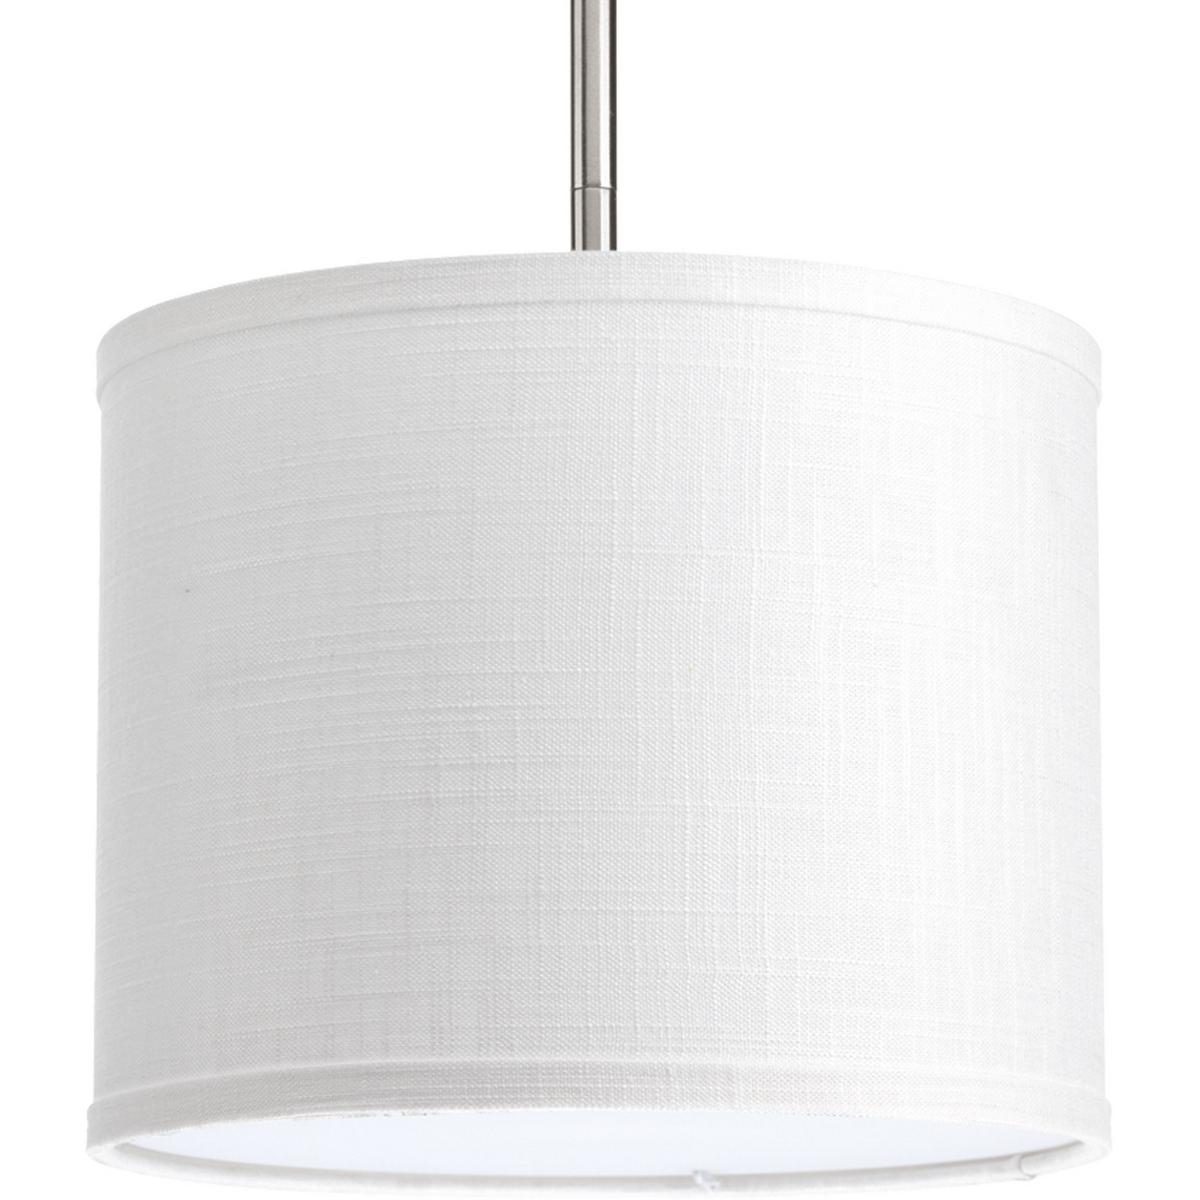 Hubbell P8828-30 The Markor Series is a modular pendant system. The versatile series allow the choice of shades and stem kits. This 10" shade with summer linen fabric is inspired by mid-century design. Acrylic bottom diffuser. This shade can be used with a variety of stem